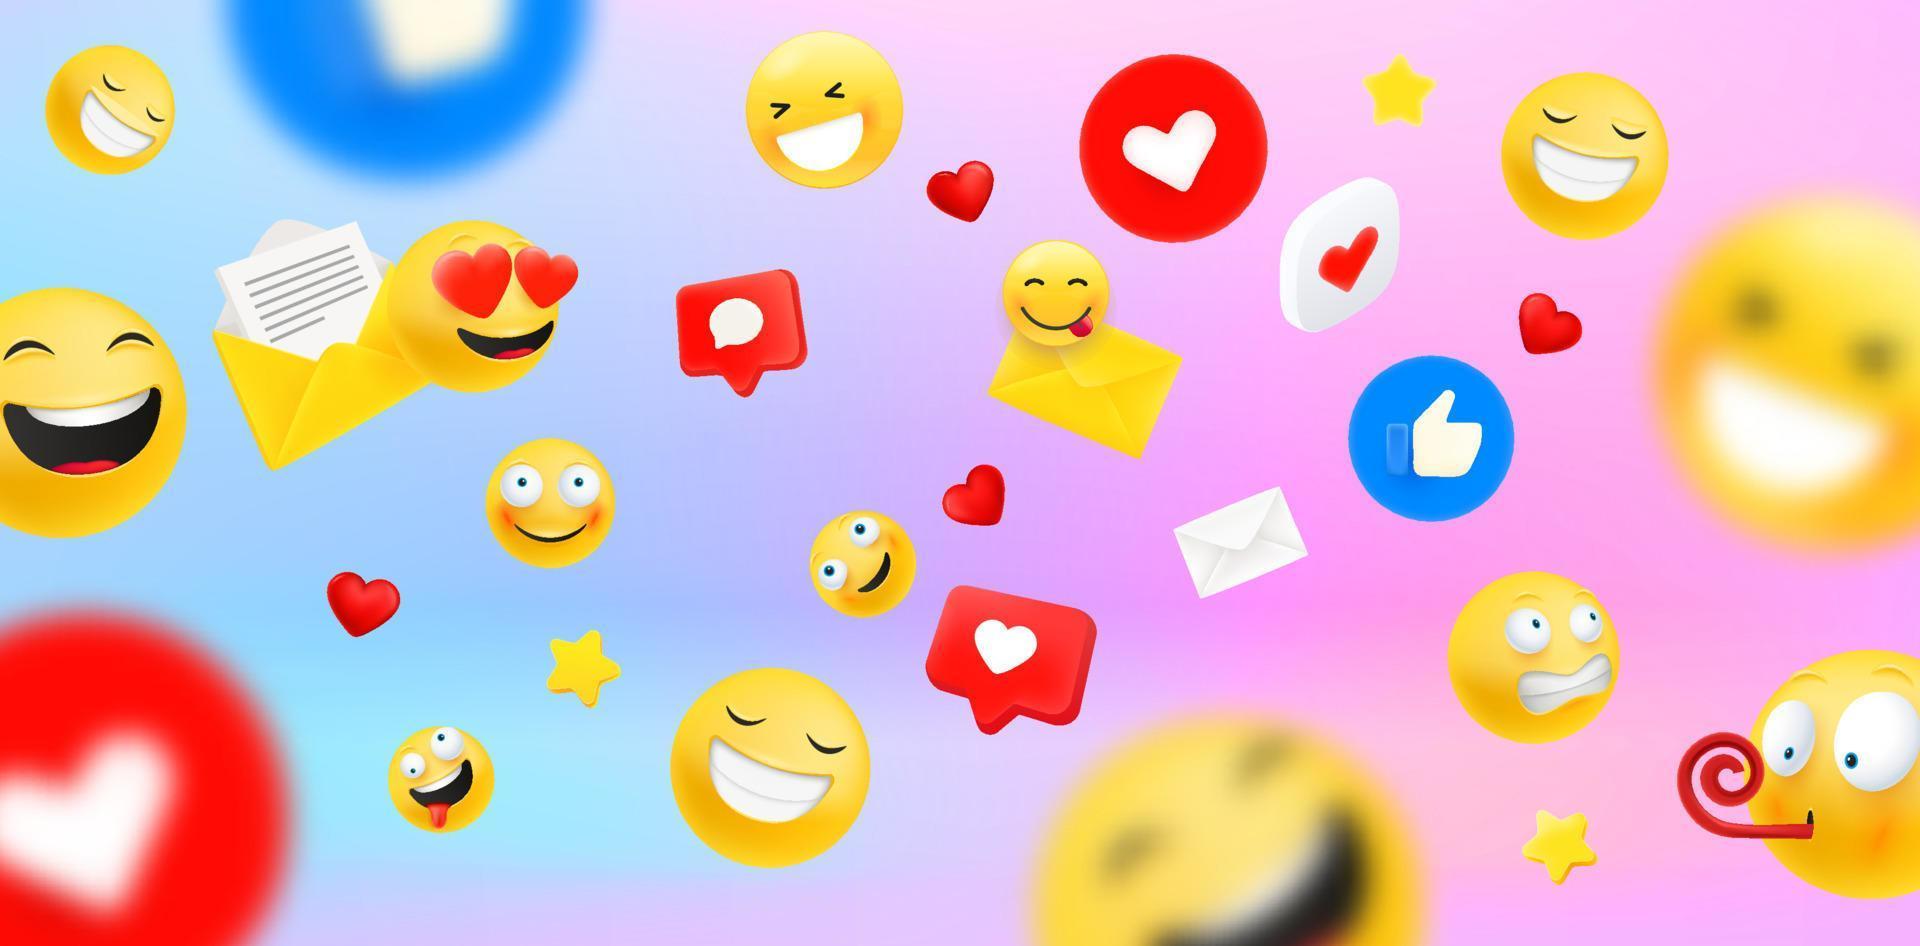 Social network communication concept with different emoji and icons. 3d vector illustration